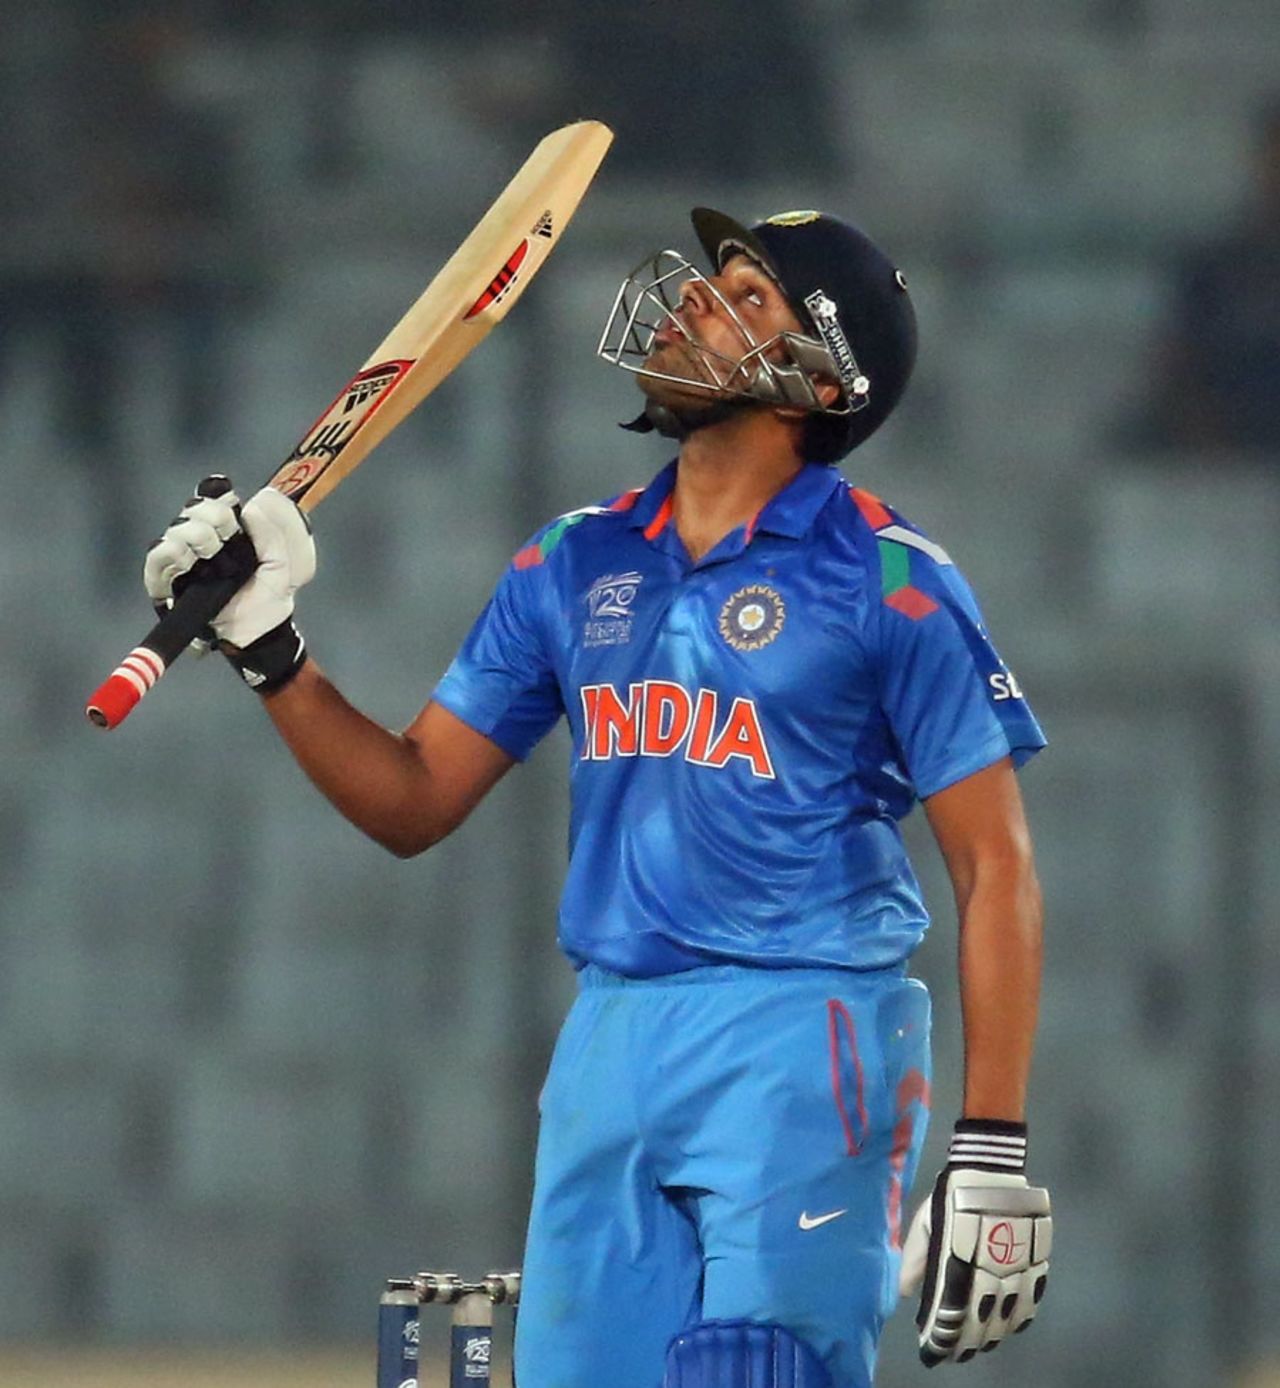 Rohit Sharma raises his bat after reaching a half-century,  India v West Indies, World T20, Group 2, Mirpur, March 23, 2014